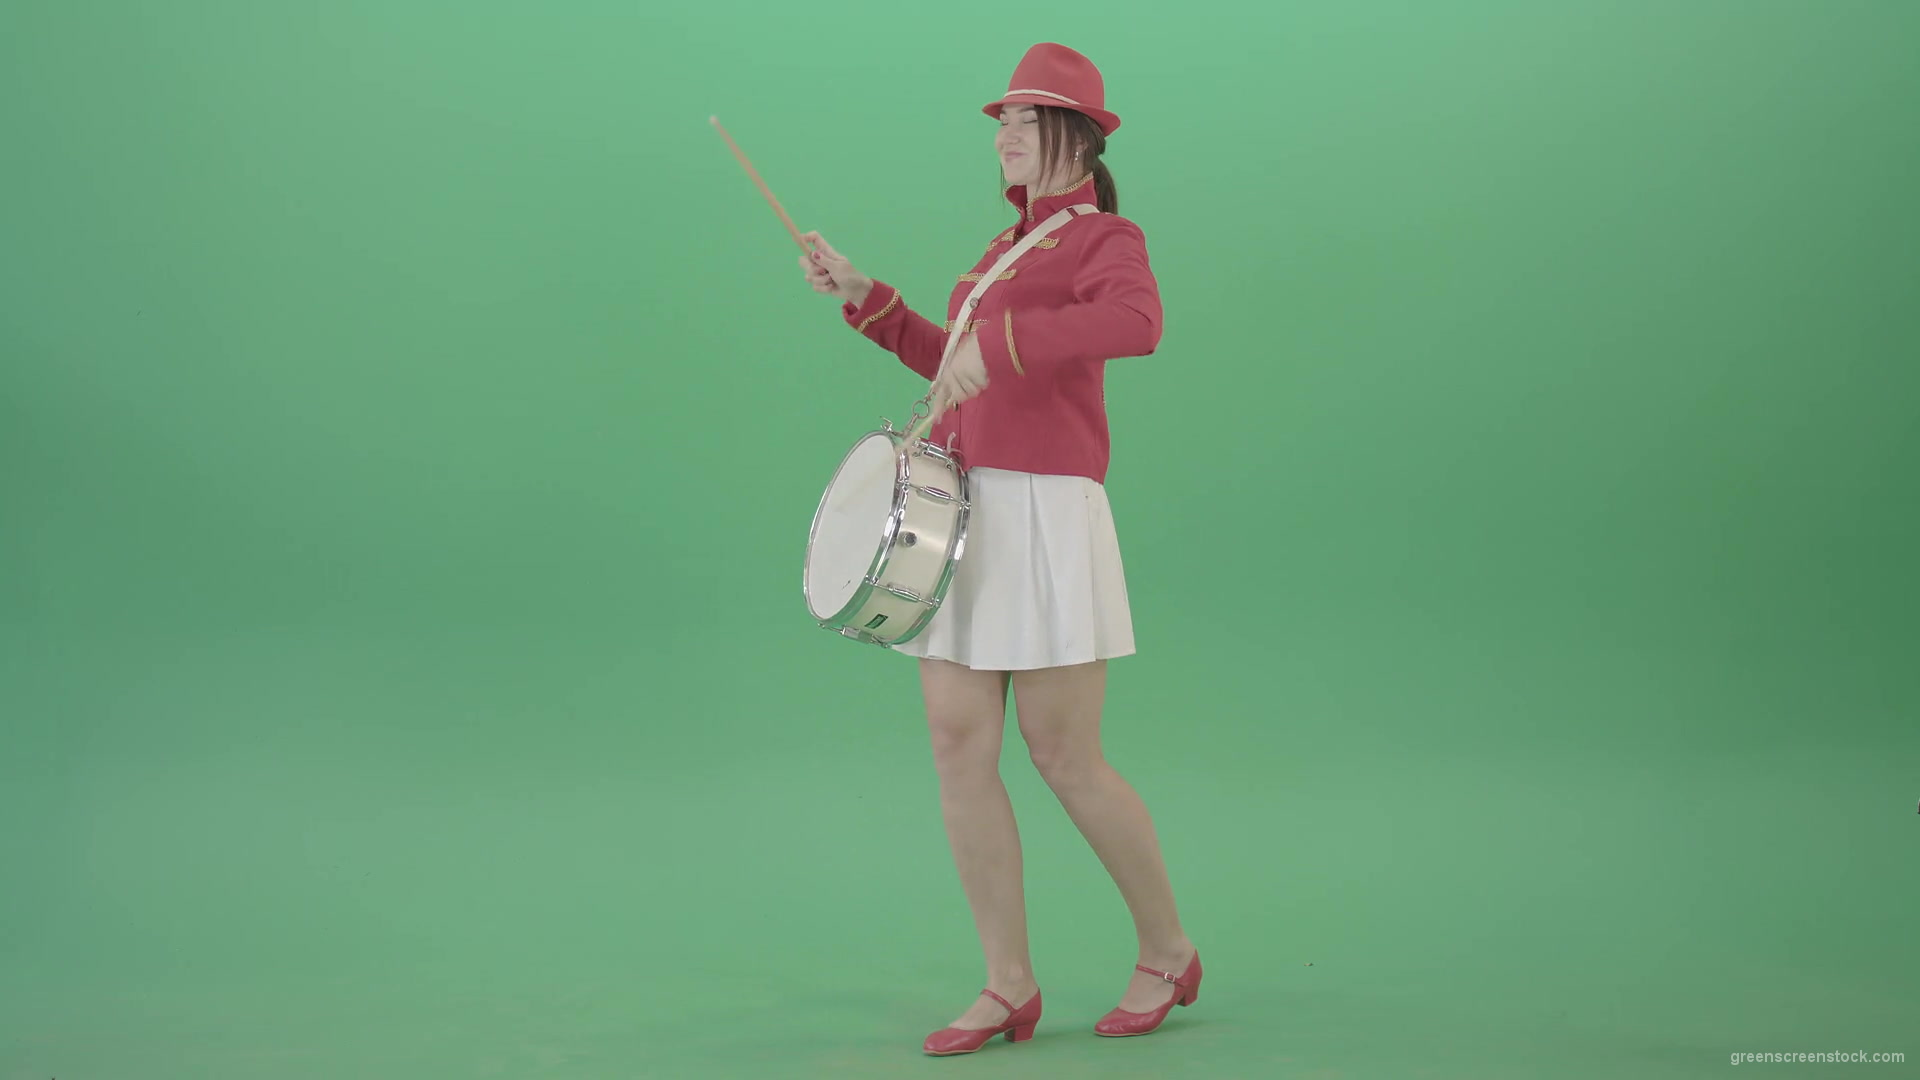 Funny-Girl-in-red-white-uniform-makes-percussion-and-play-drums-isolated-on-green-screen-4K-Video-Footage-1920_008 Green Screen Stock